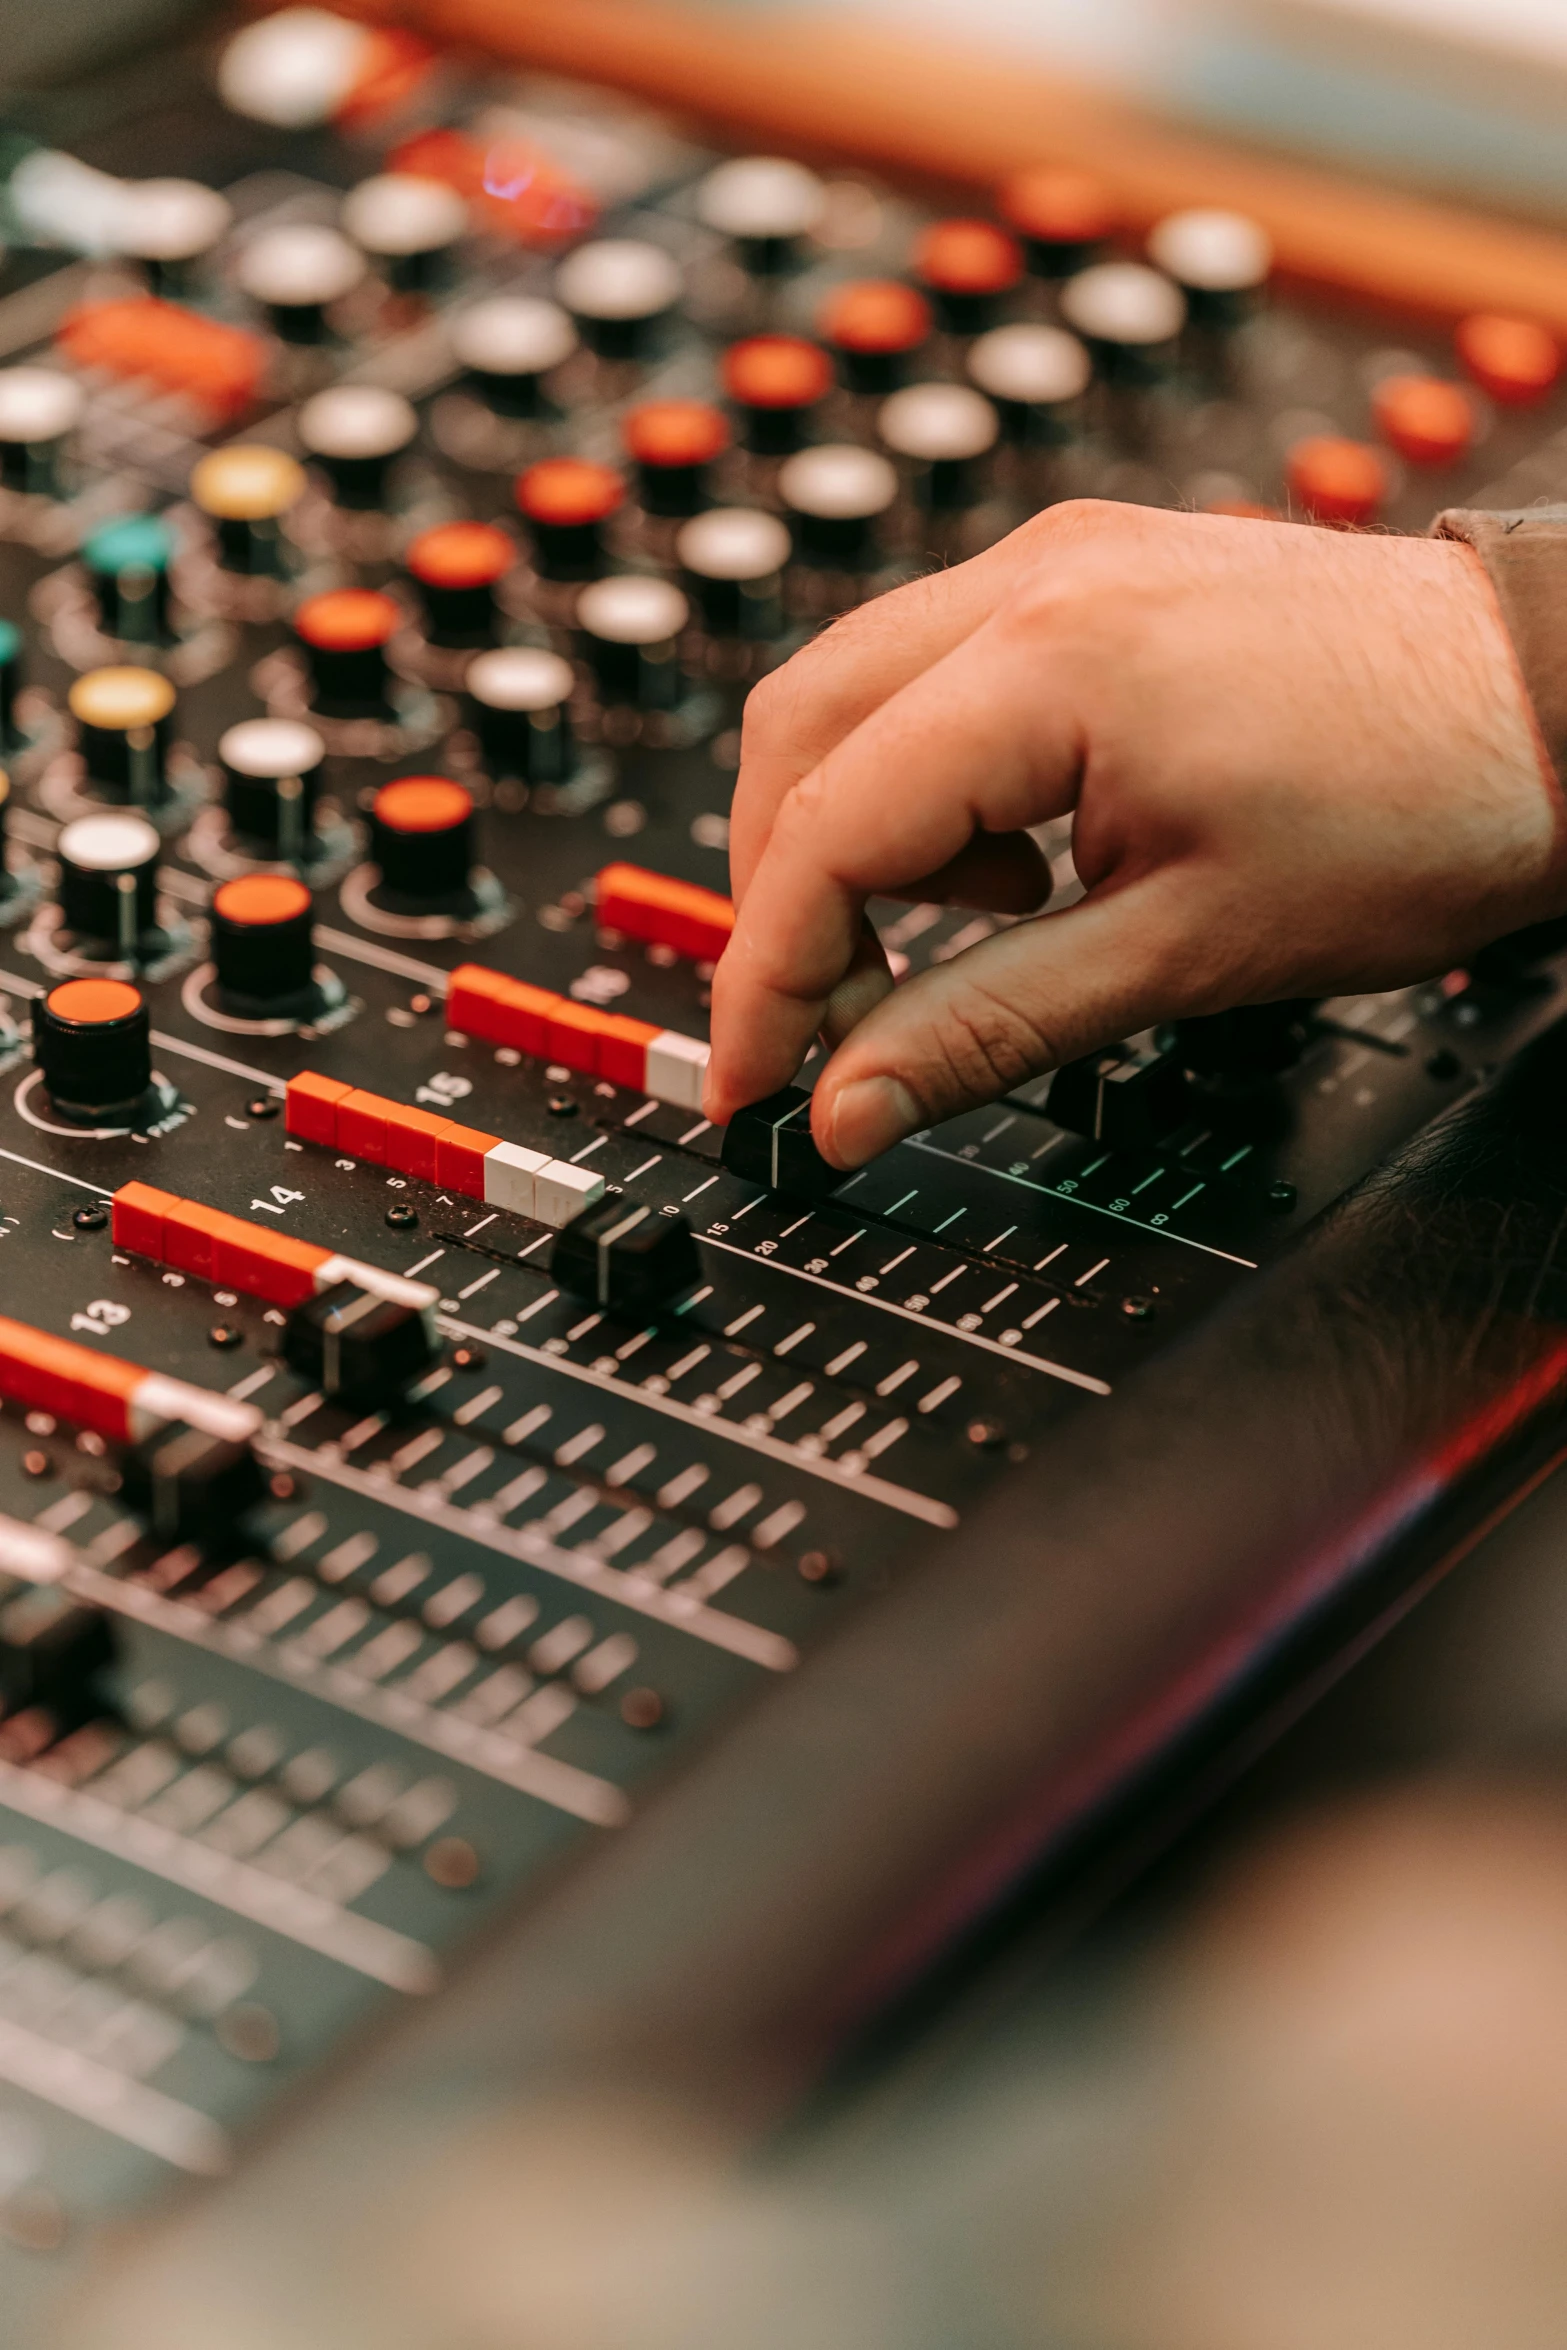 a close up of a person's hand on a mixing board, an album cover, pexels, electronic circuitry, ilustration, people at work, studio orange